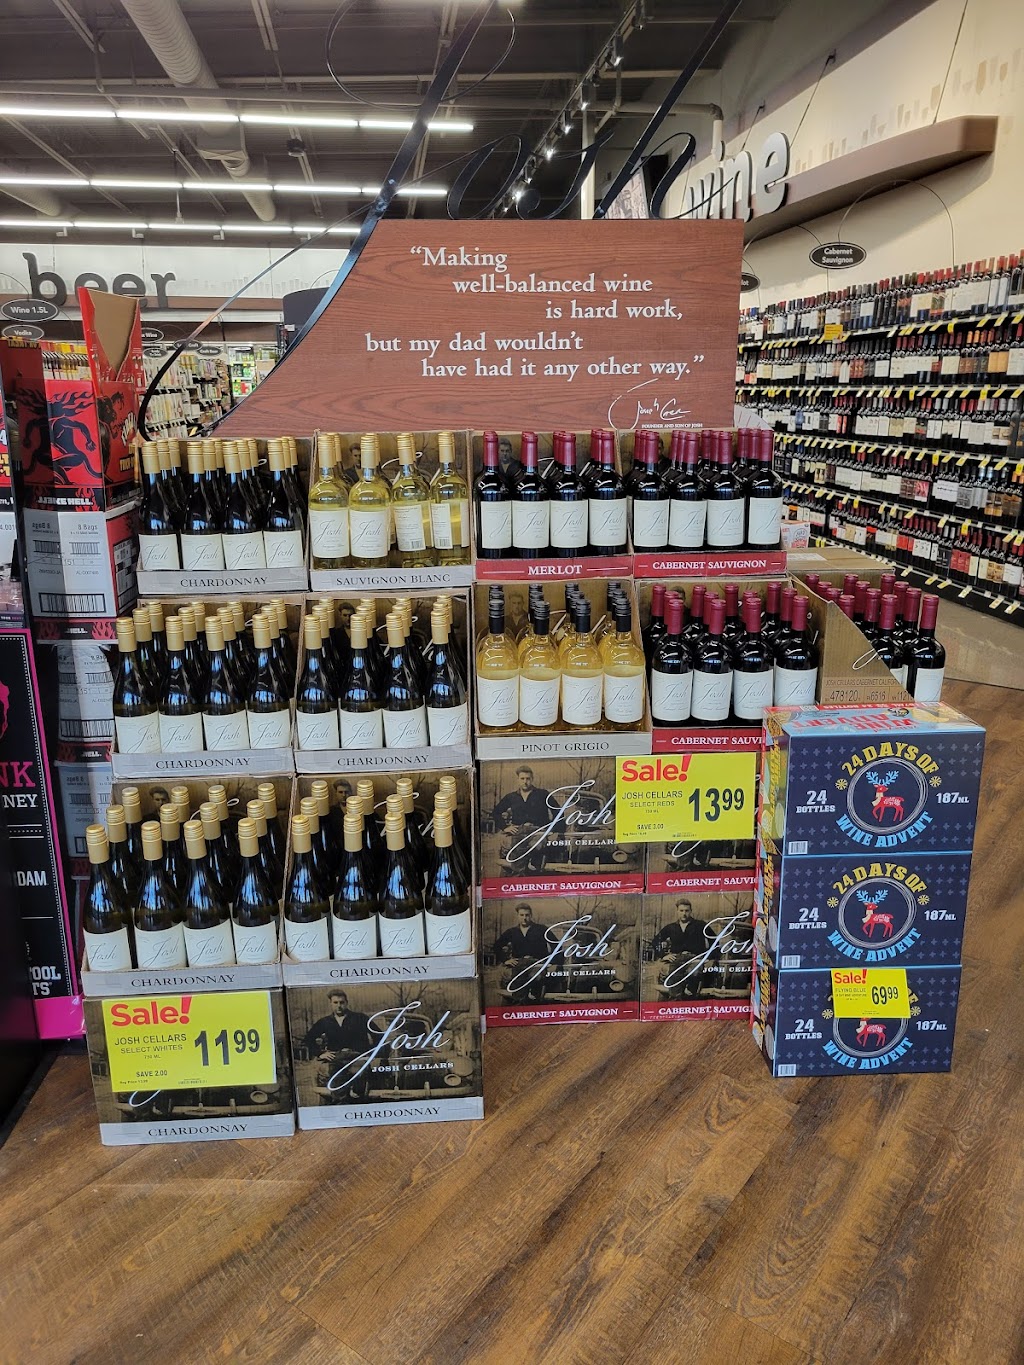 Cub Wine & Spirits - Coon Rapids | 12940 Riverdale Dr NW, Coon Rapids, MN 55448, USA | Phone: (763) 576-1744